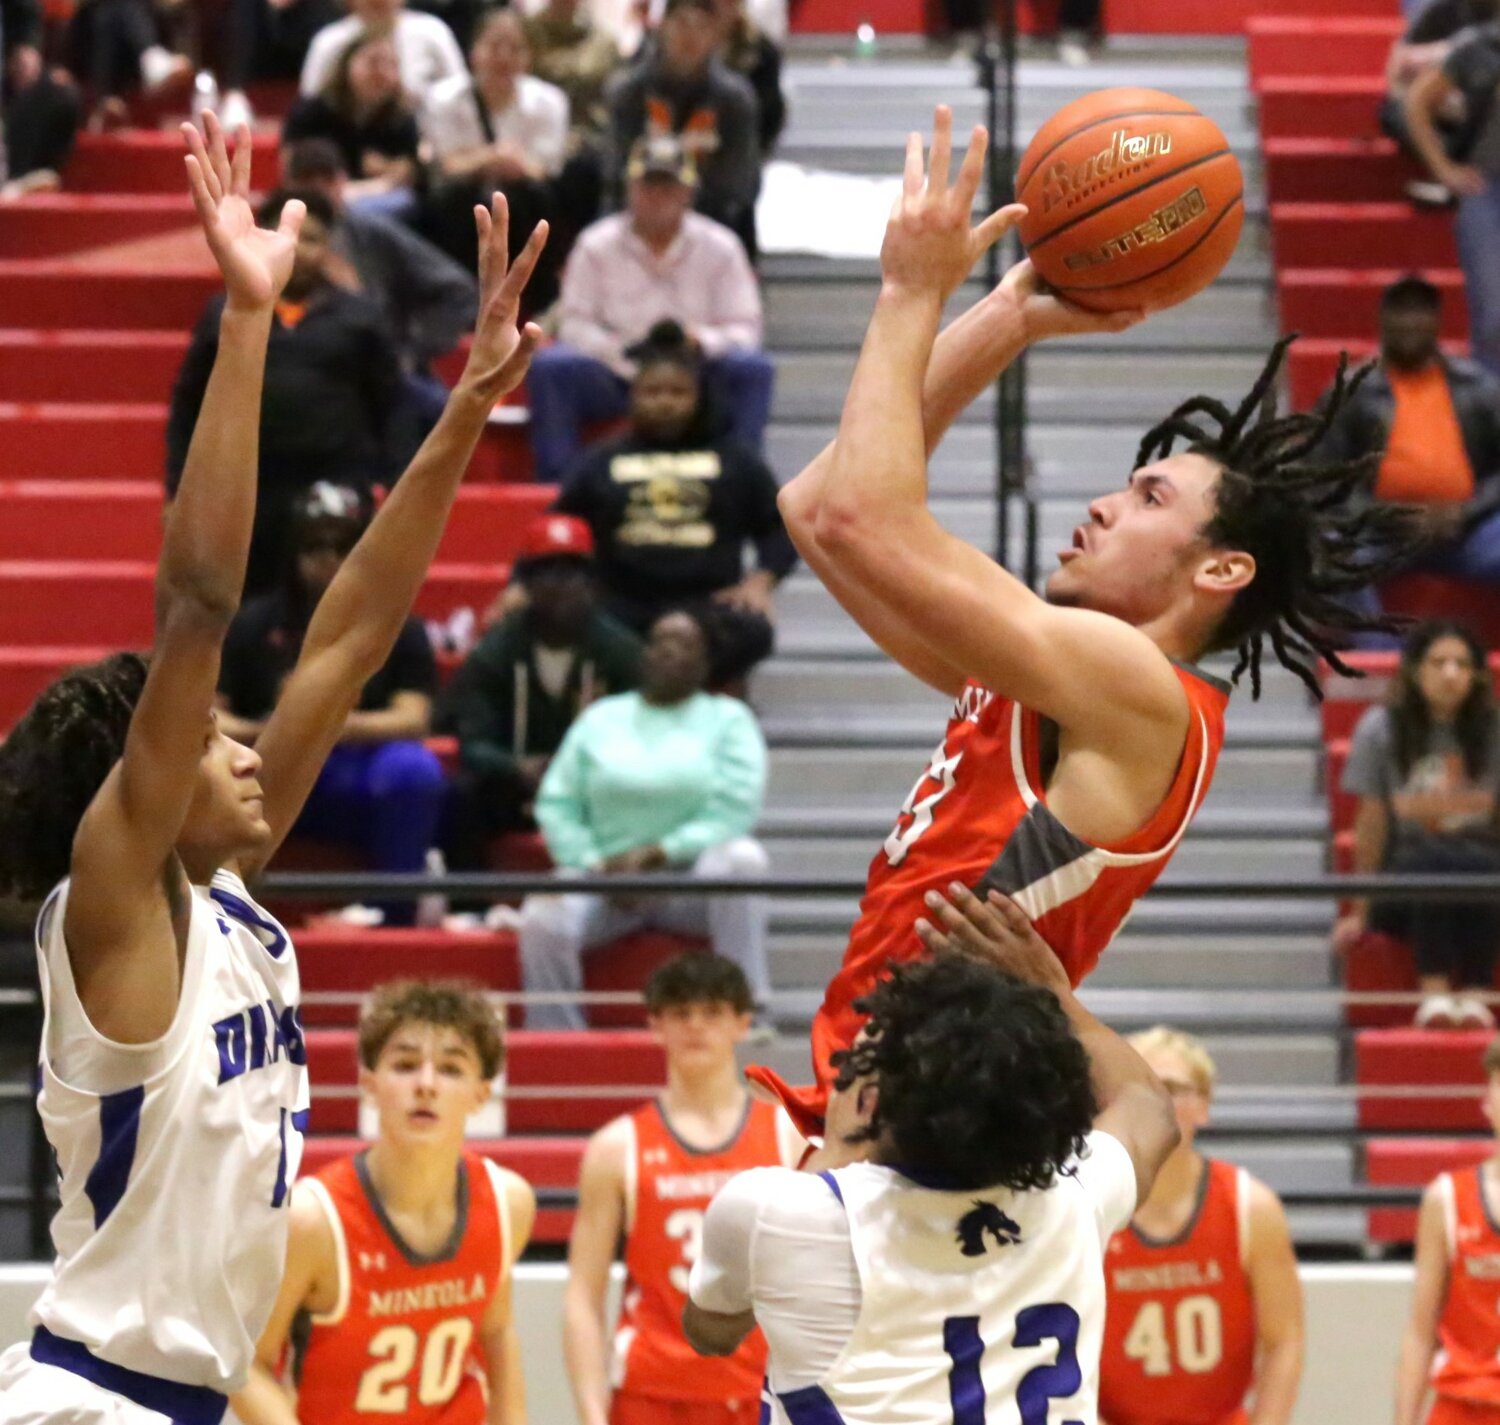 Mineola’s Braydon Alley puts up a jumper from the lane.